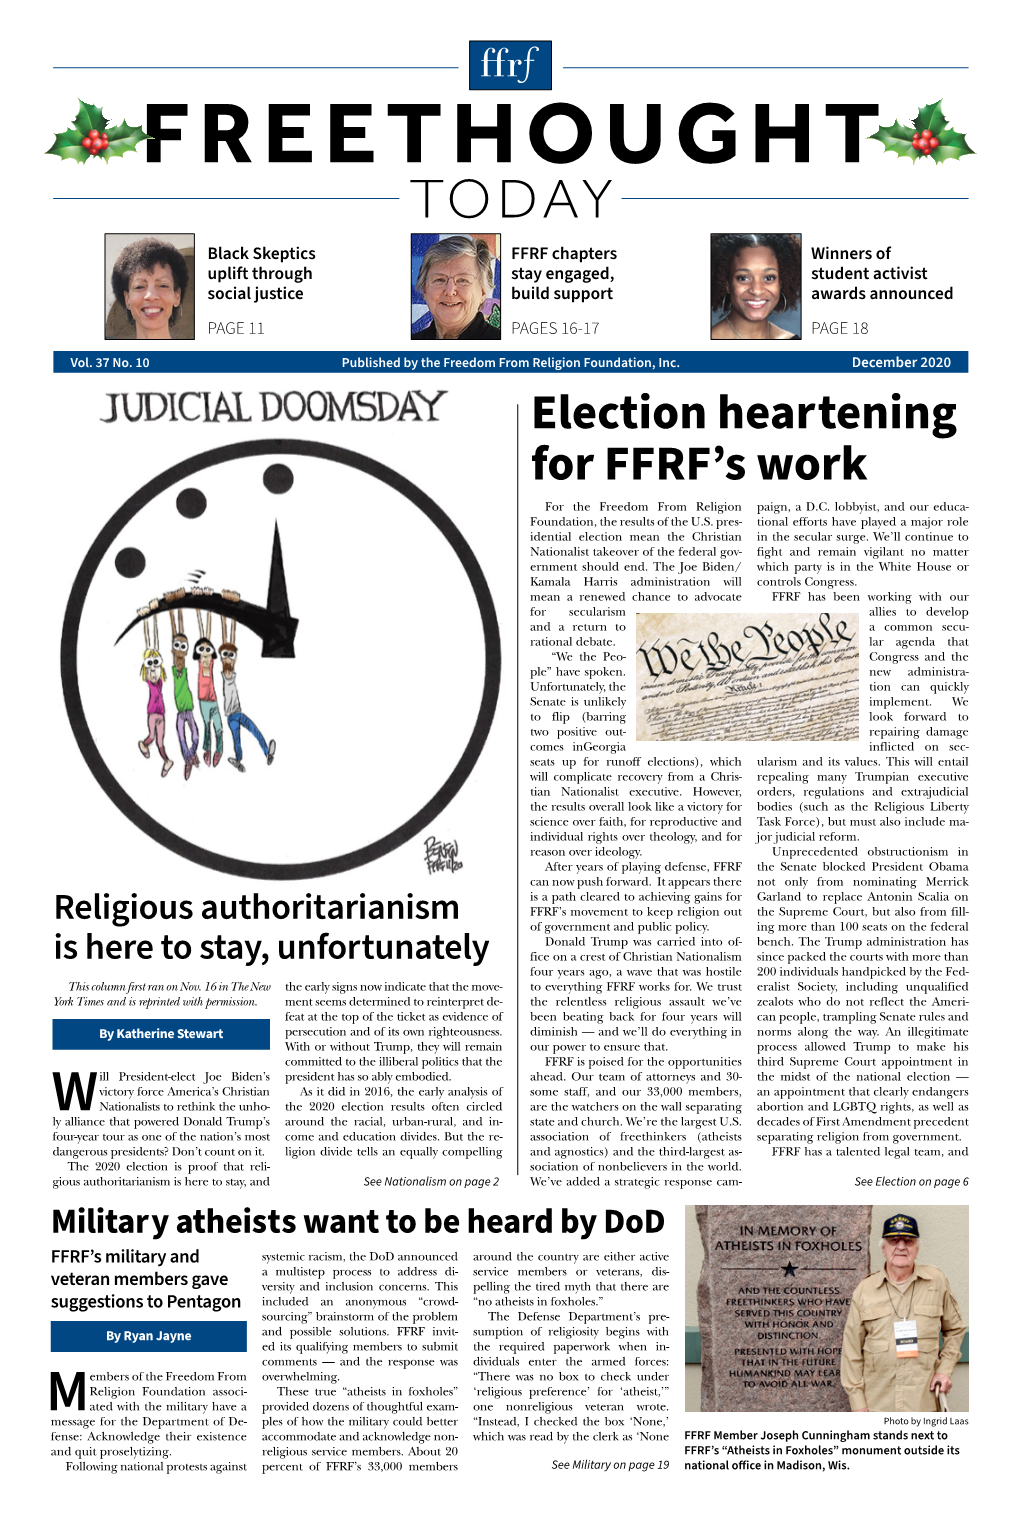 December 2020 Election Heartening for FFRF’S Work for the Freedom from Religion Paign, a D.C